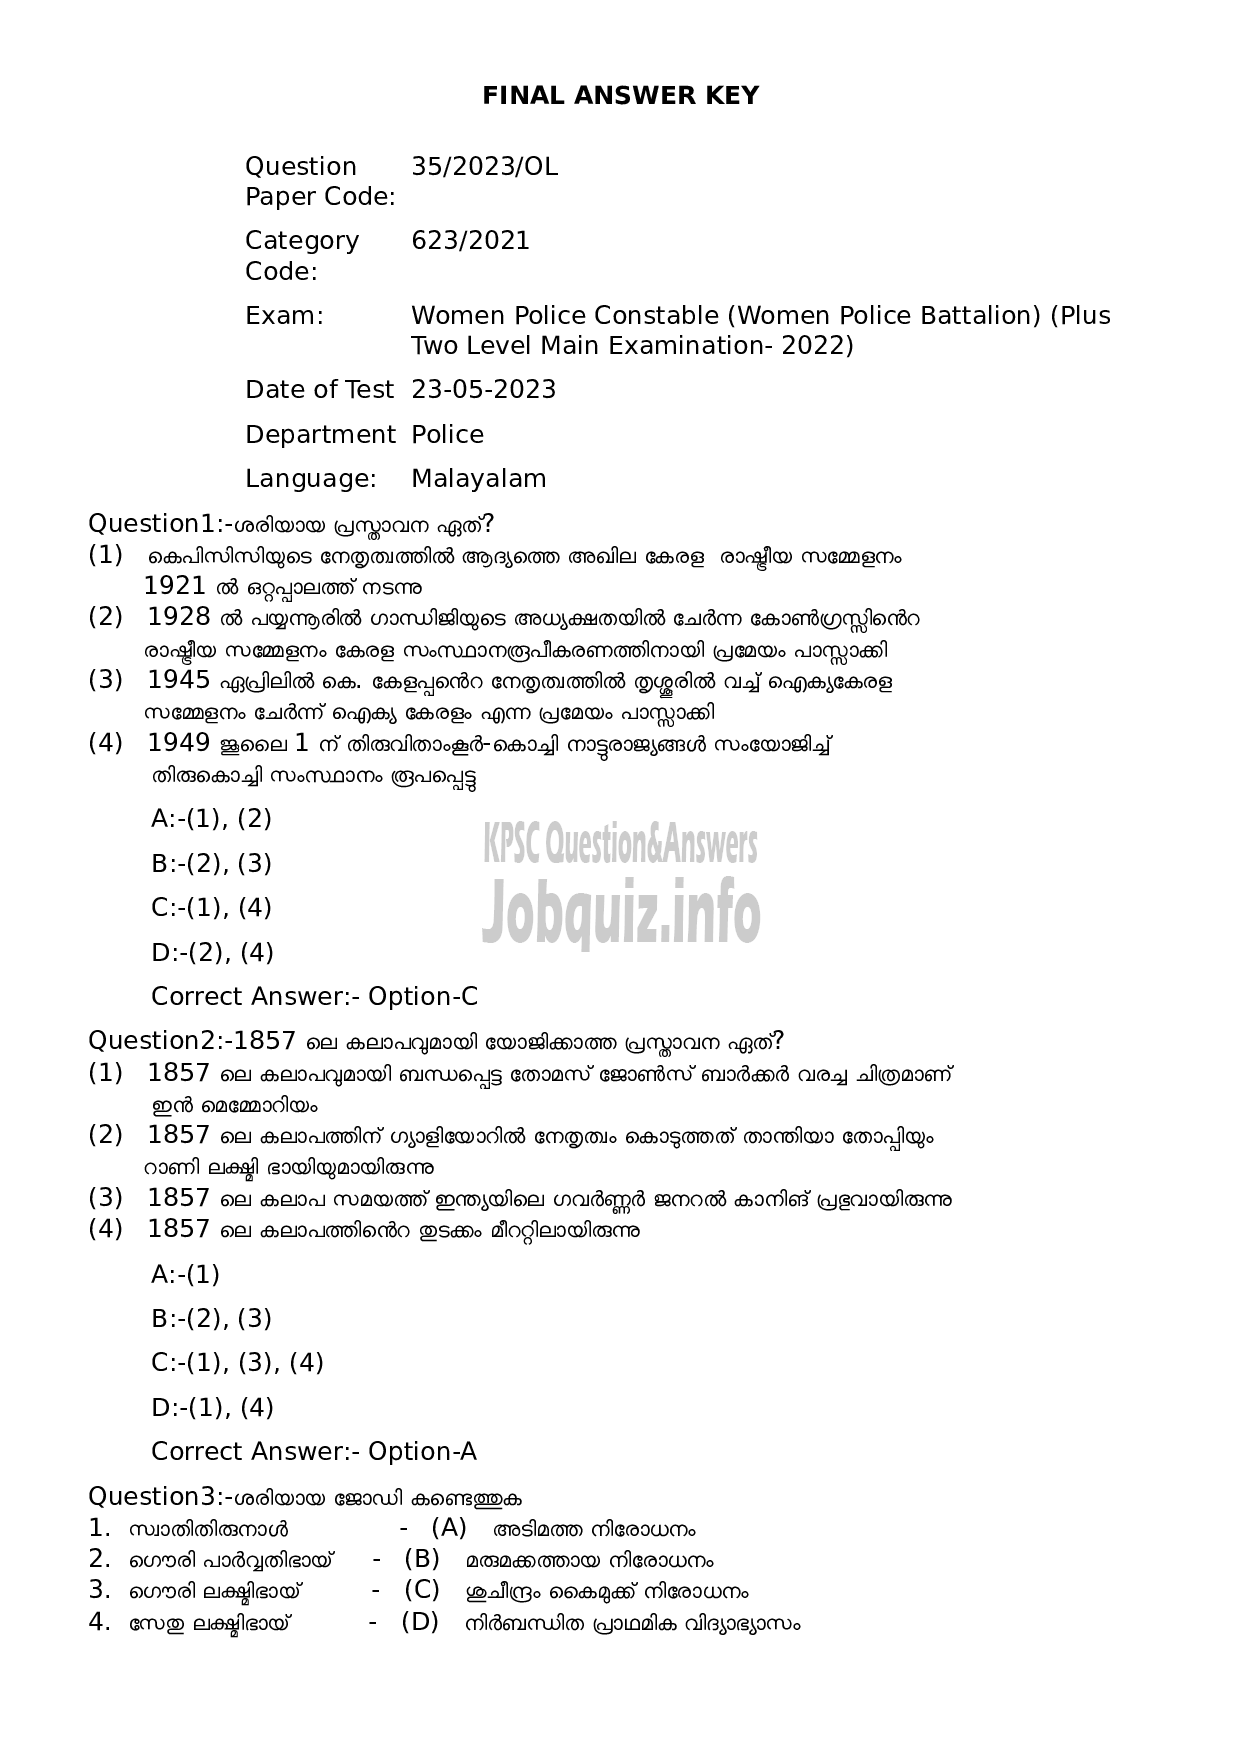 Kerala PSC Question Paper -  Women Police Constable (Women Police Battalion) (Plus Two Level Main Examination- 2022)-1